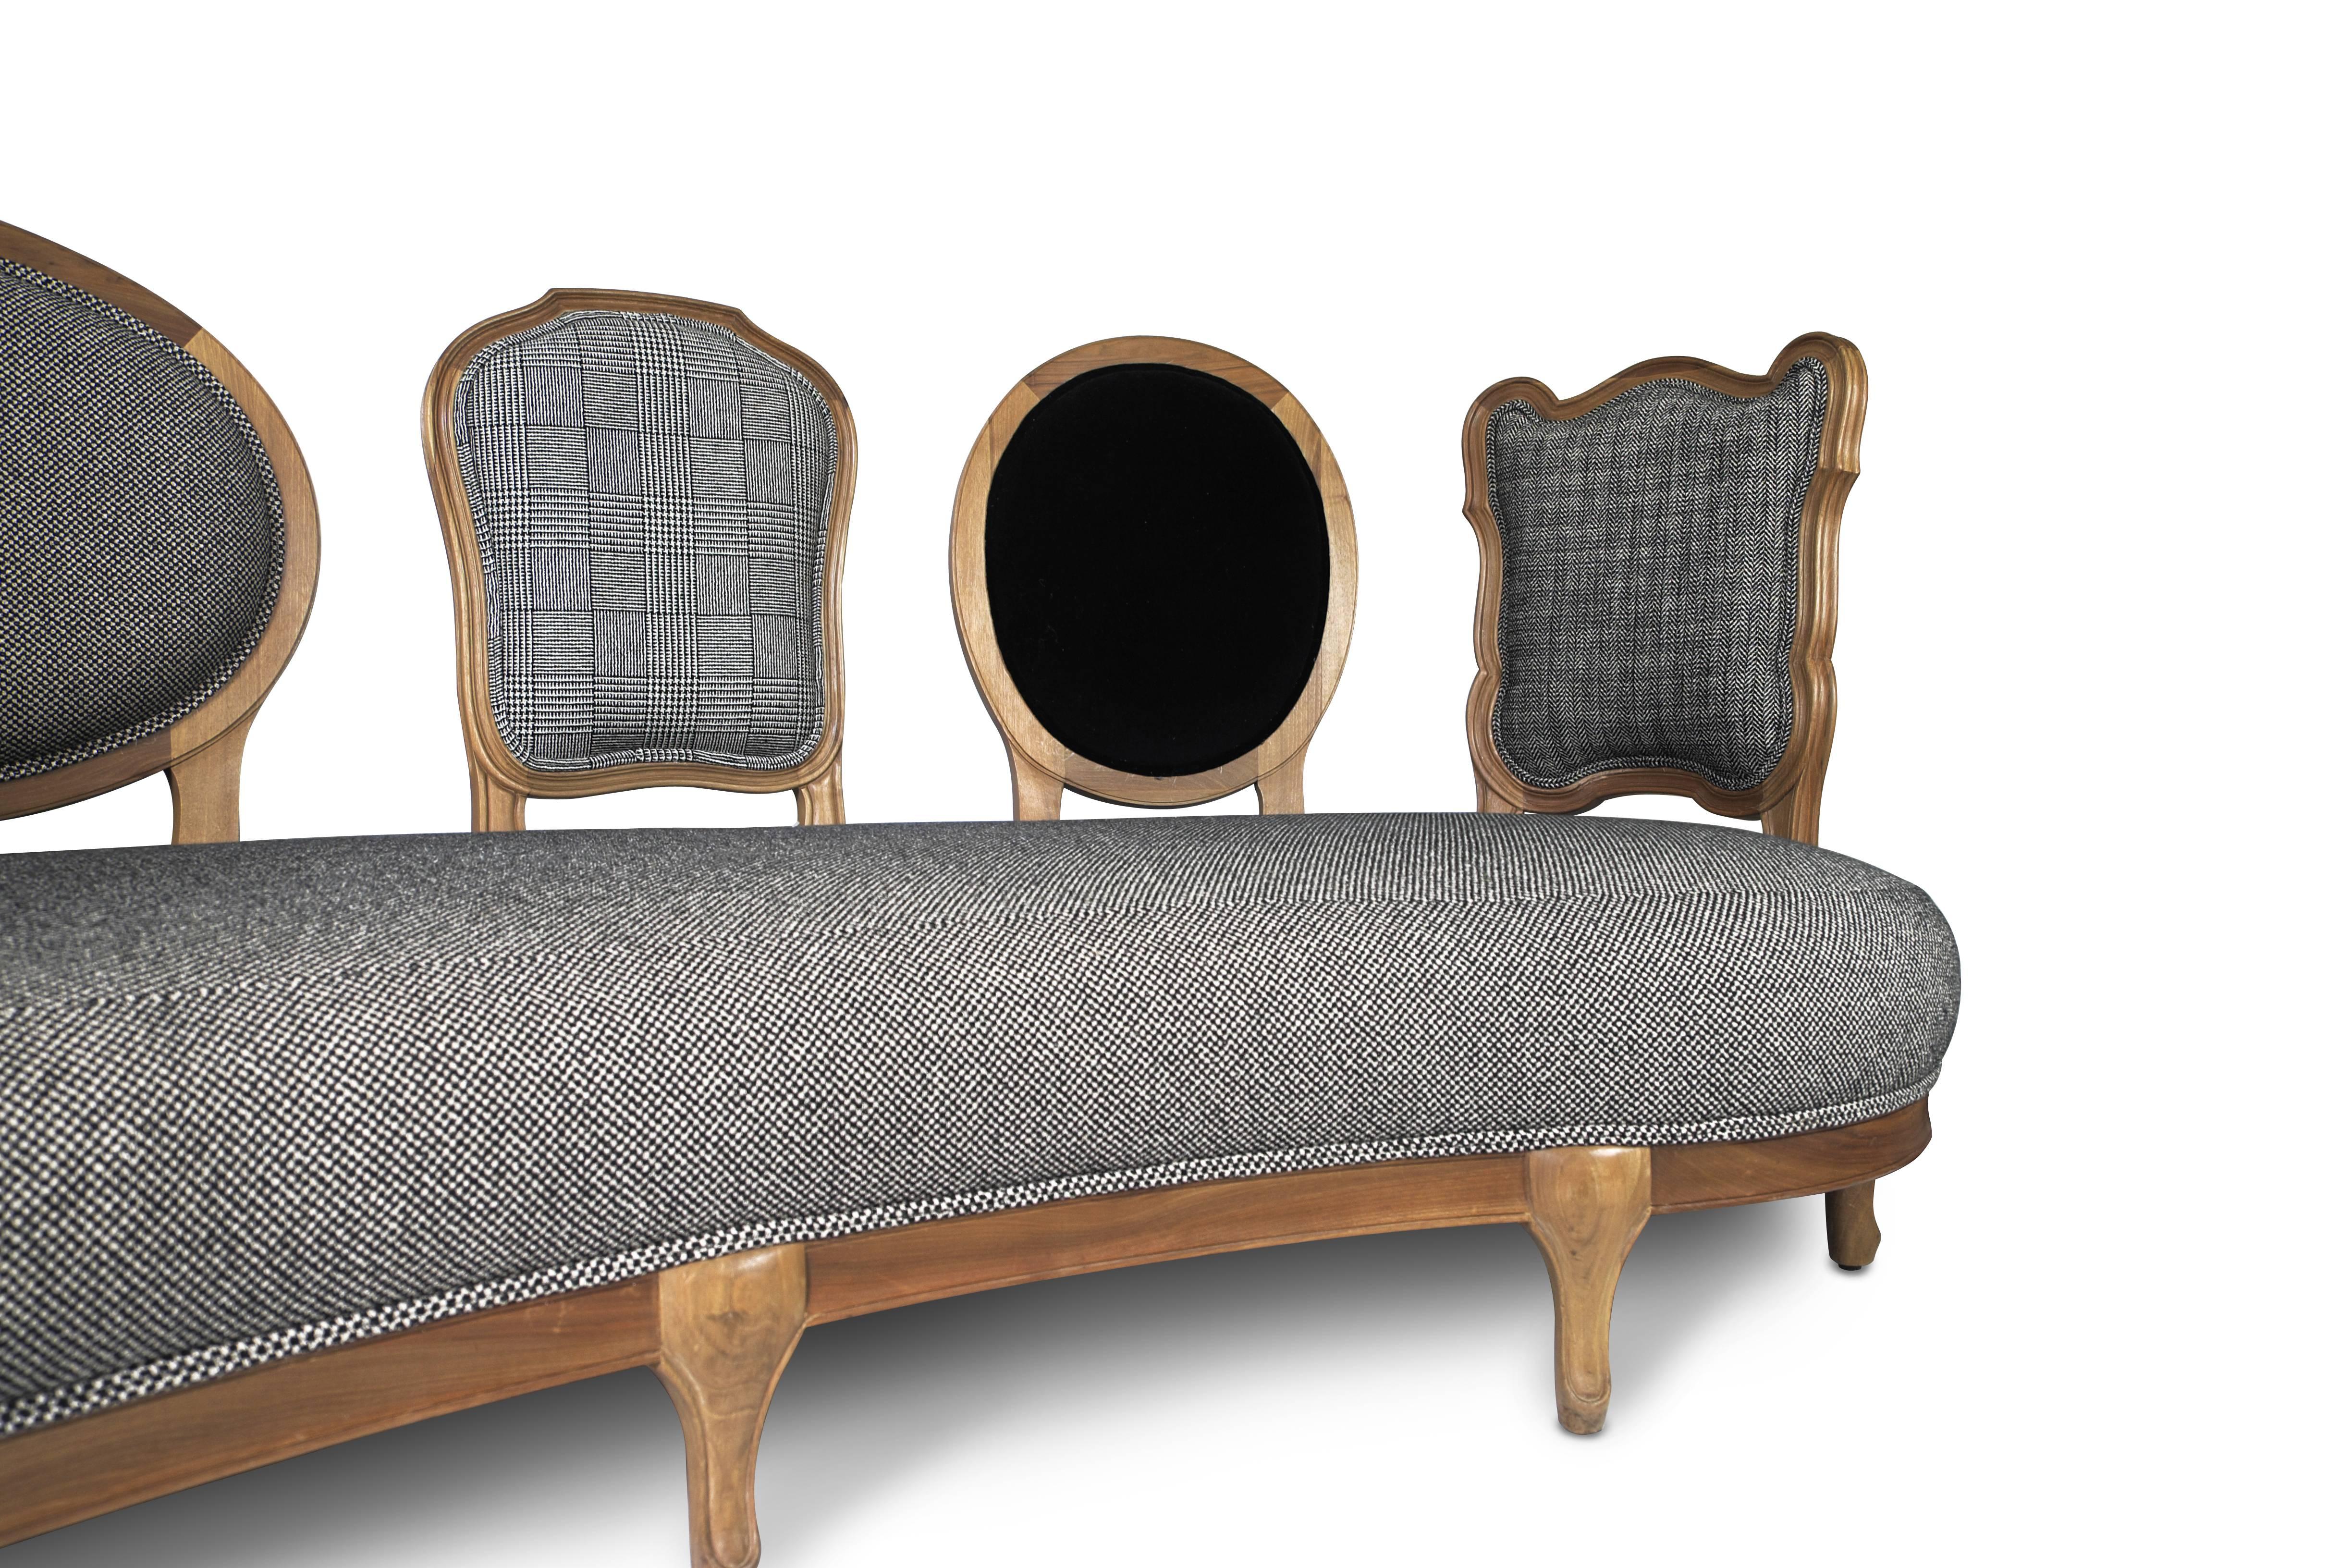 The key icon of Coates’ Scubist collection. This opulent and comfortable sofa brings timber-framed furniture into the 21st century. Its five backs are each upholstered in patterned tweed fabric.

Carved frame in solid walnut, seat and backs